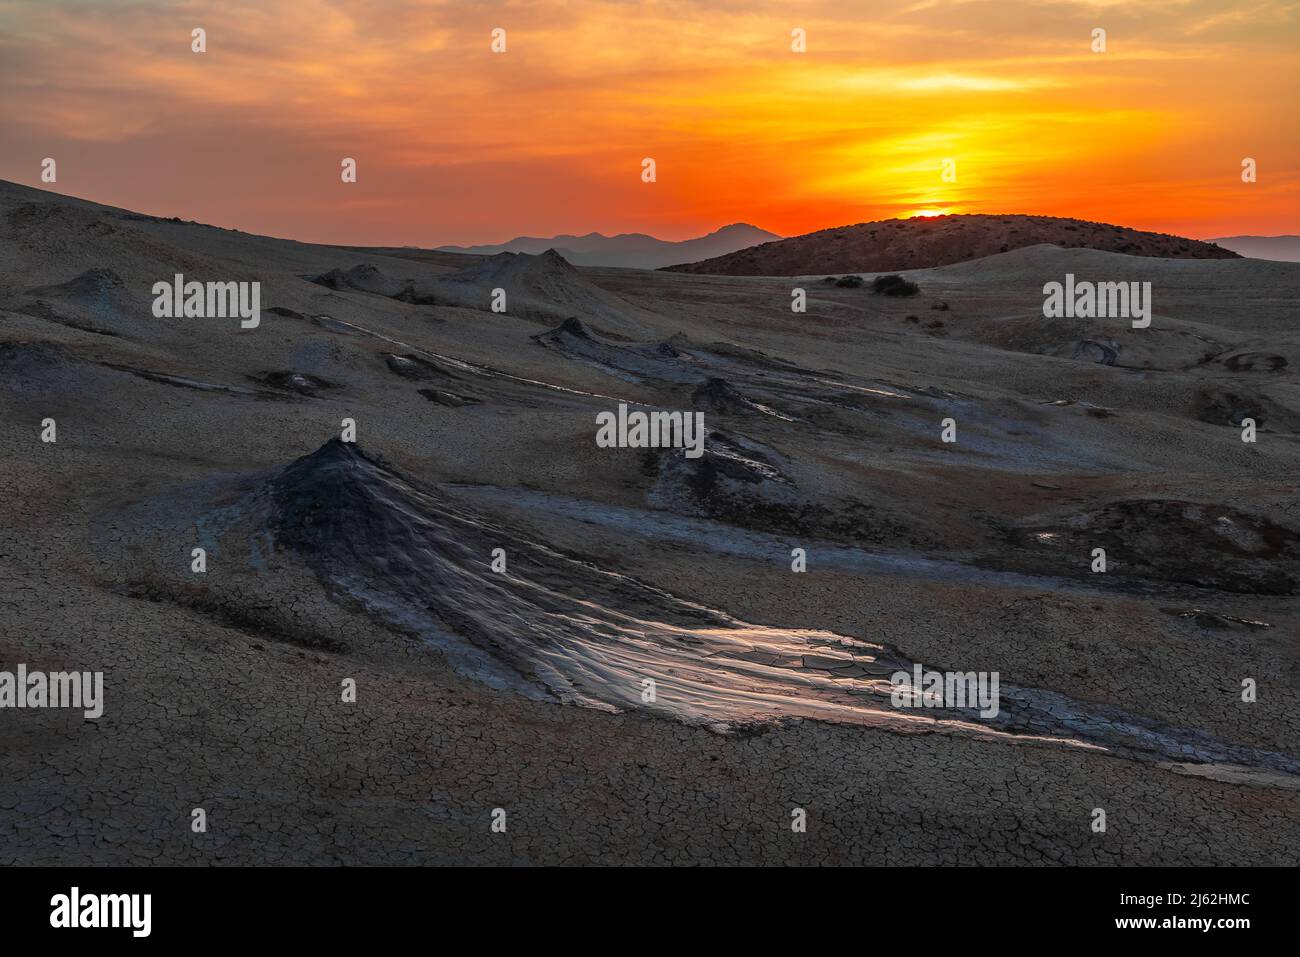 Dramatic view of the mud volcano at sunset time Stock Photo